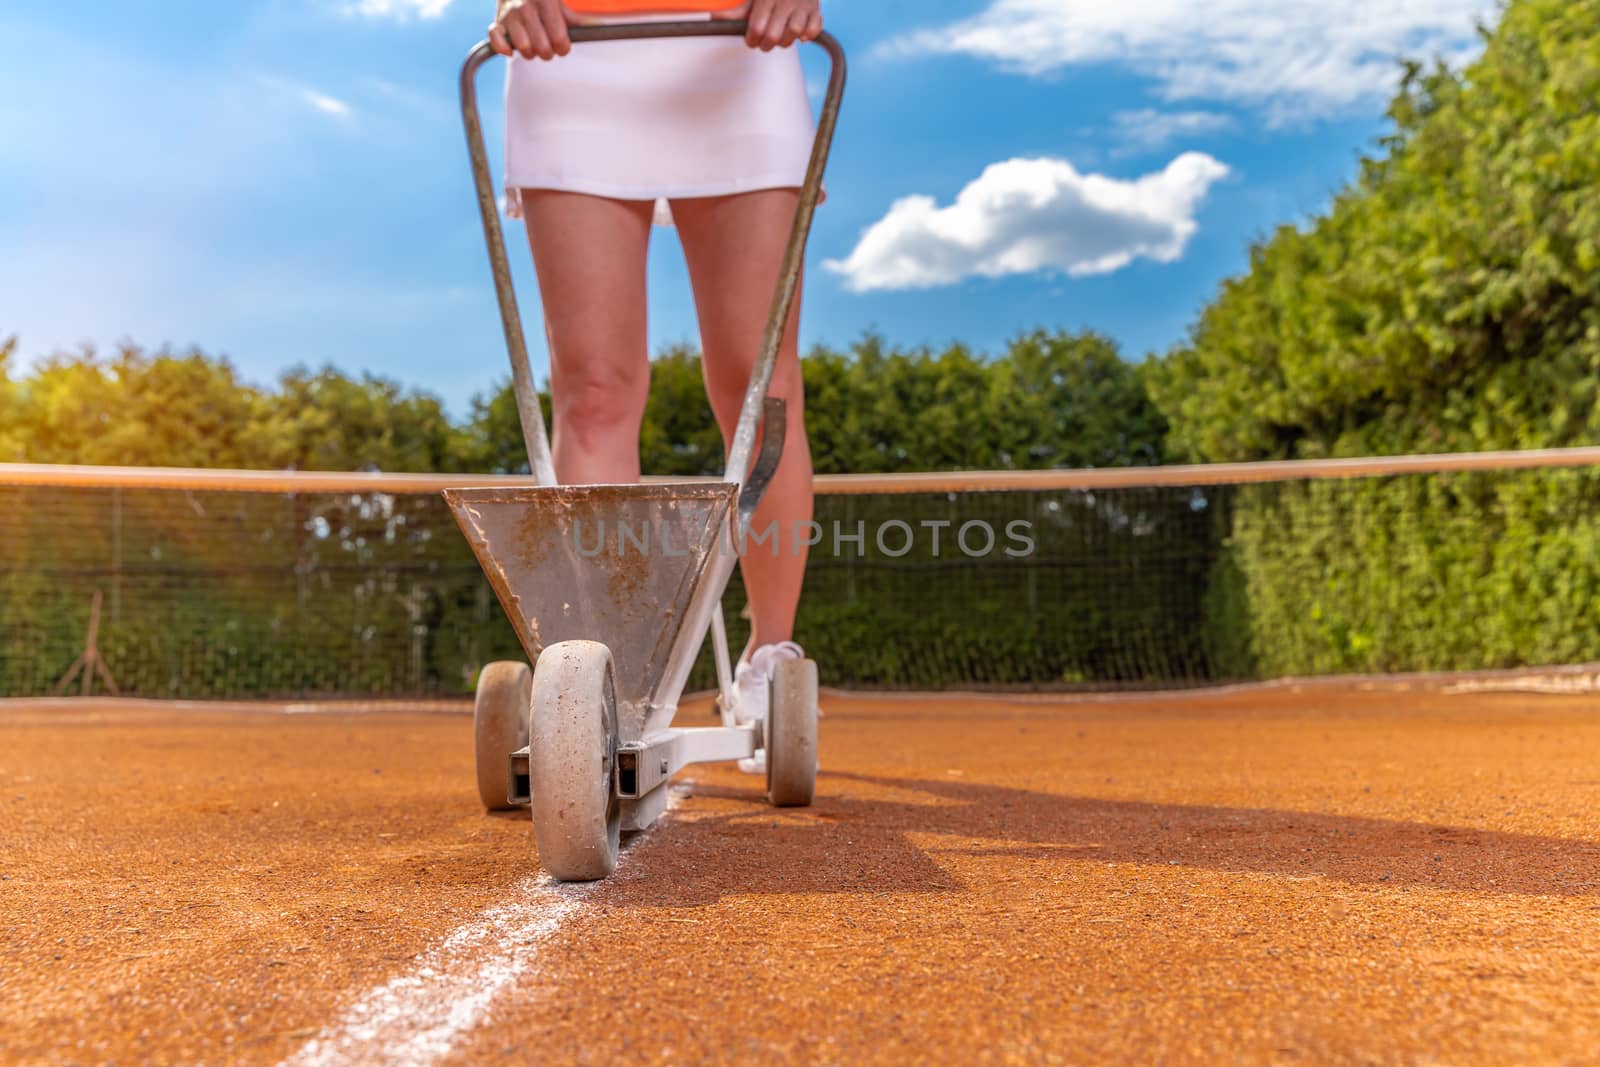 tennis player marks a lime white line on a tennis court. copy space.